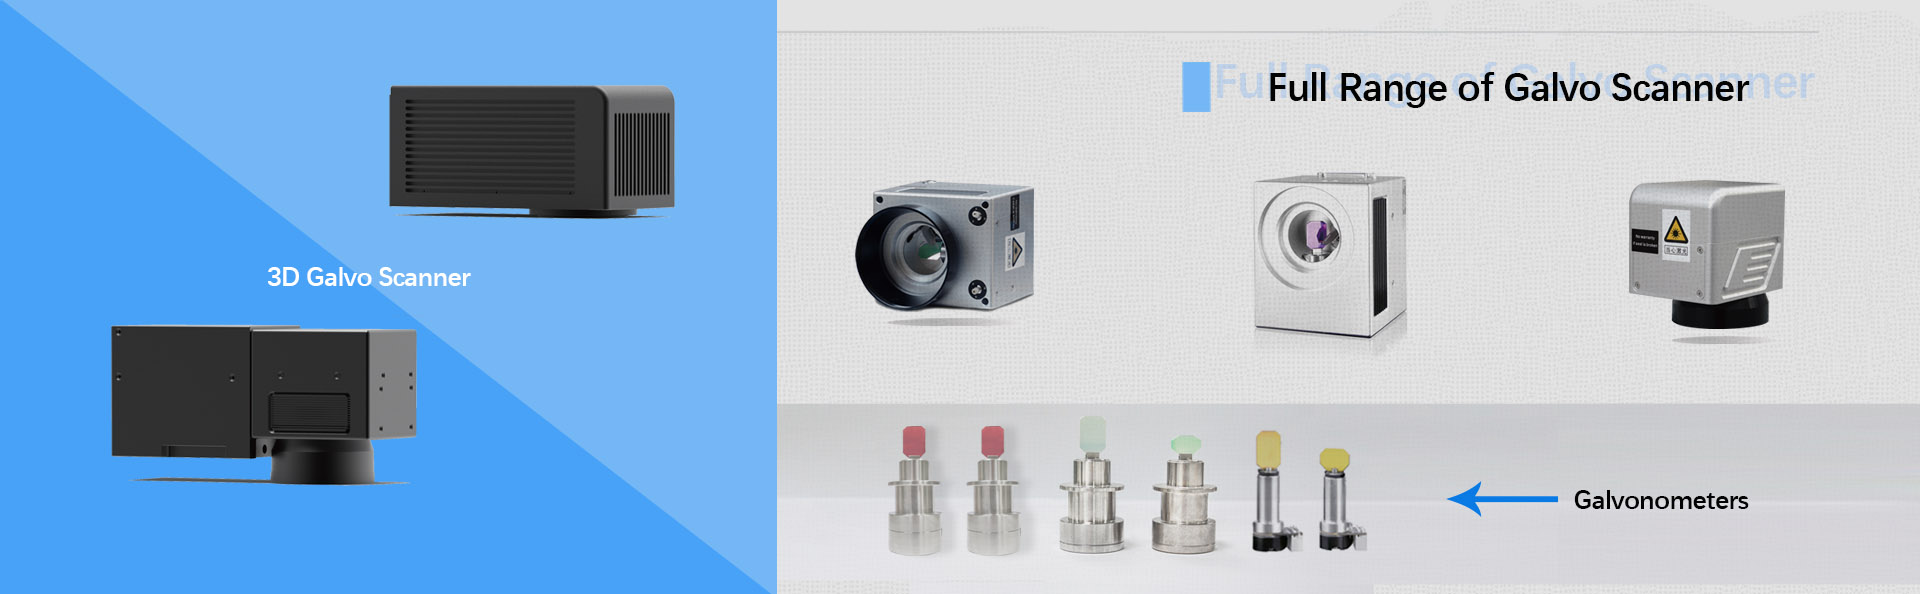 2D and 3D laser galvo scanner head with high quality and reliability from China.